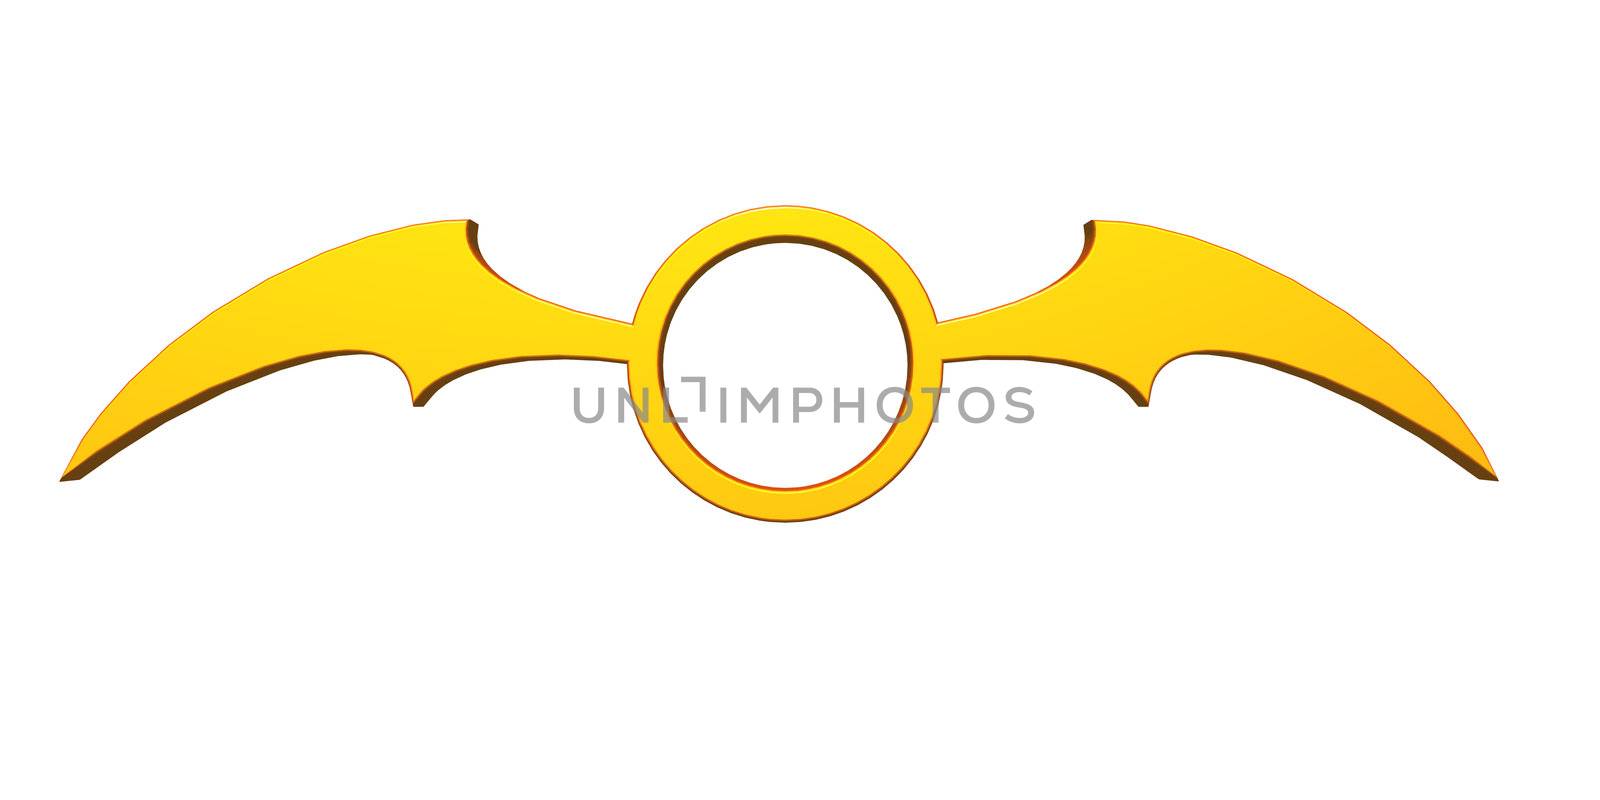 ring with batwings logo on white background - 3d illustration